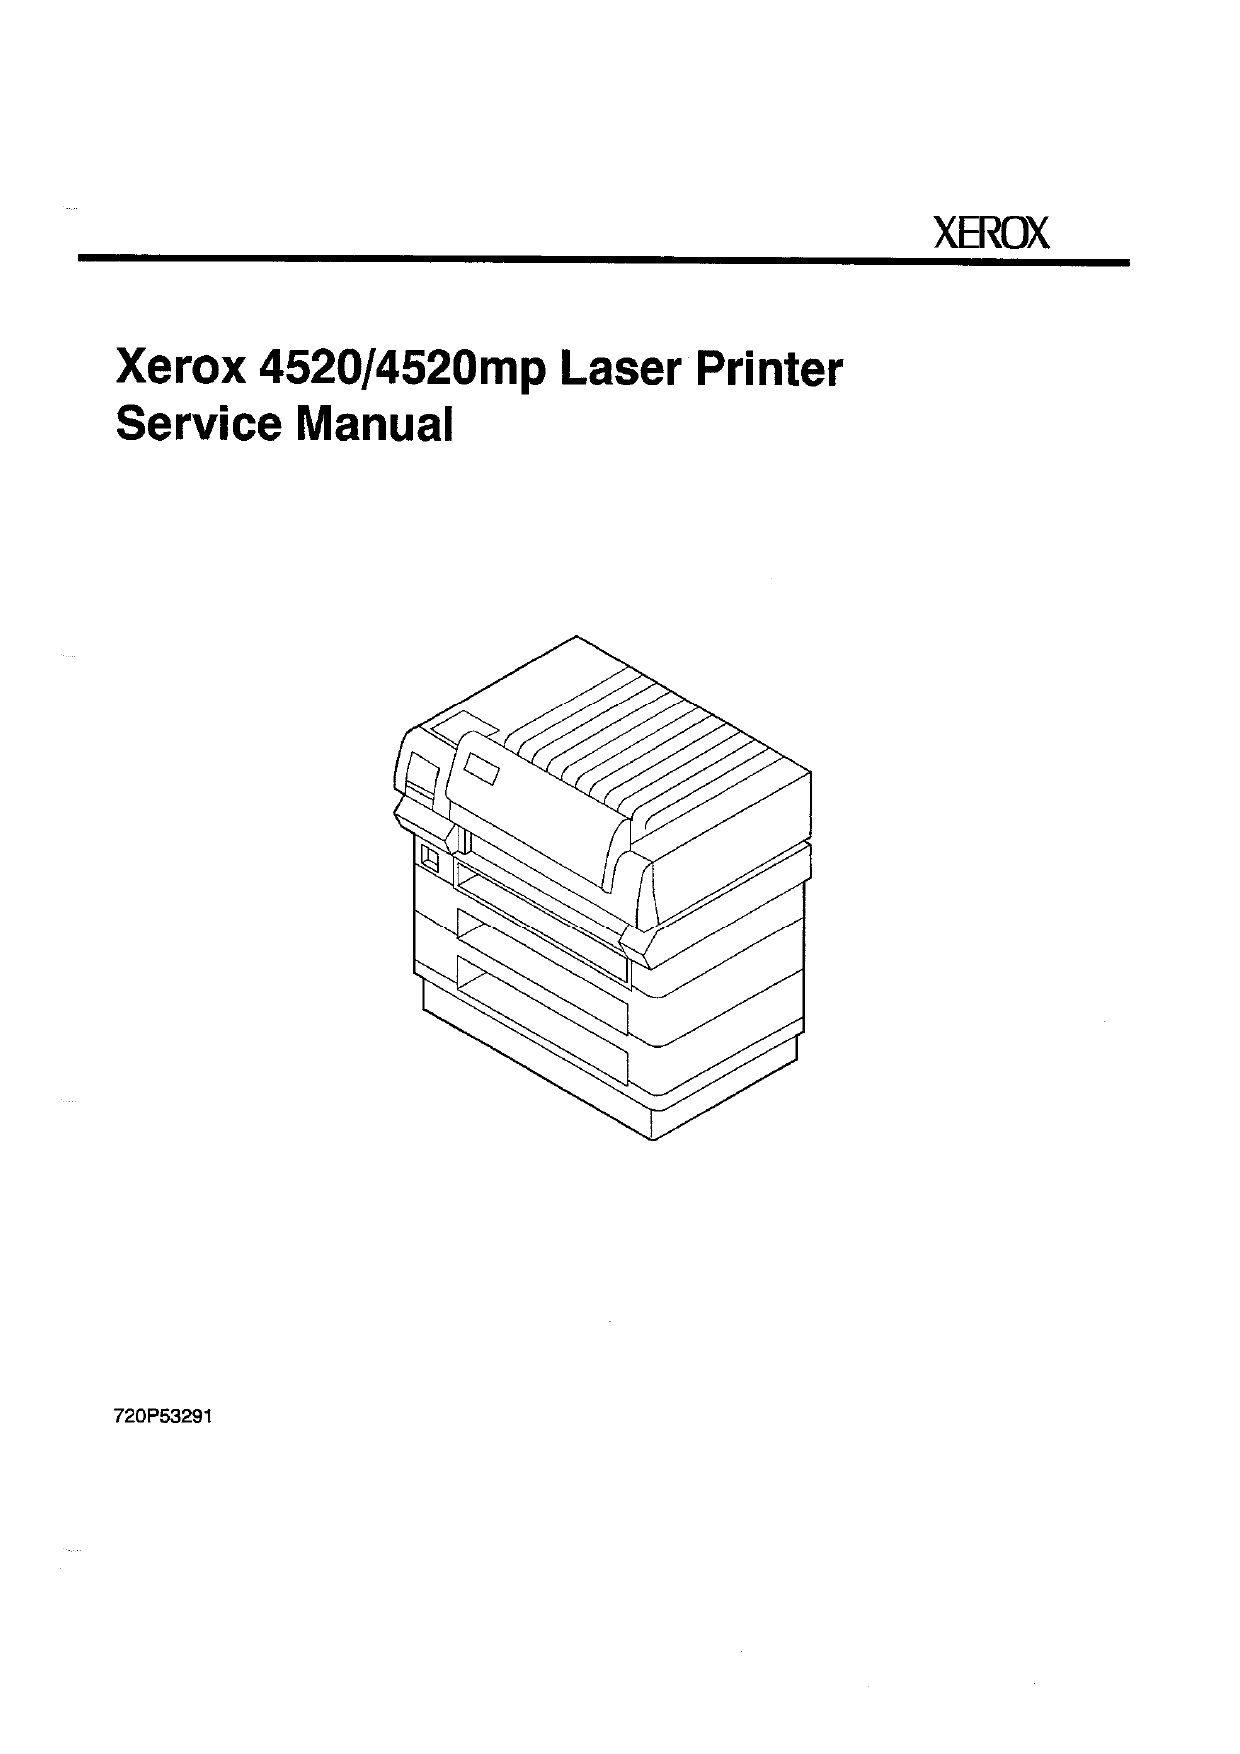 Xerox Printer 4520 4520mp Parts List and Service Manual-1